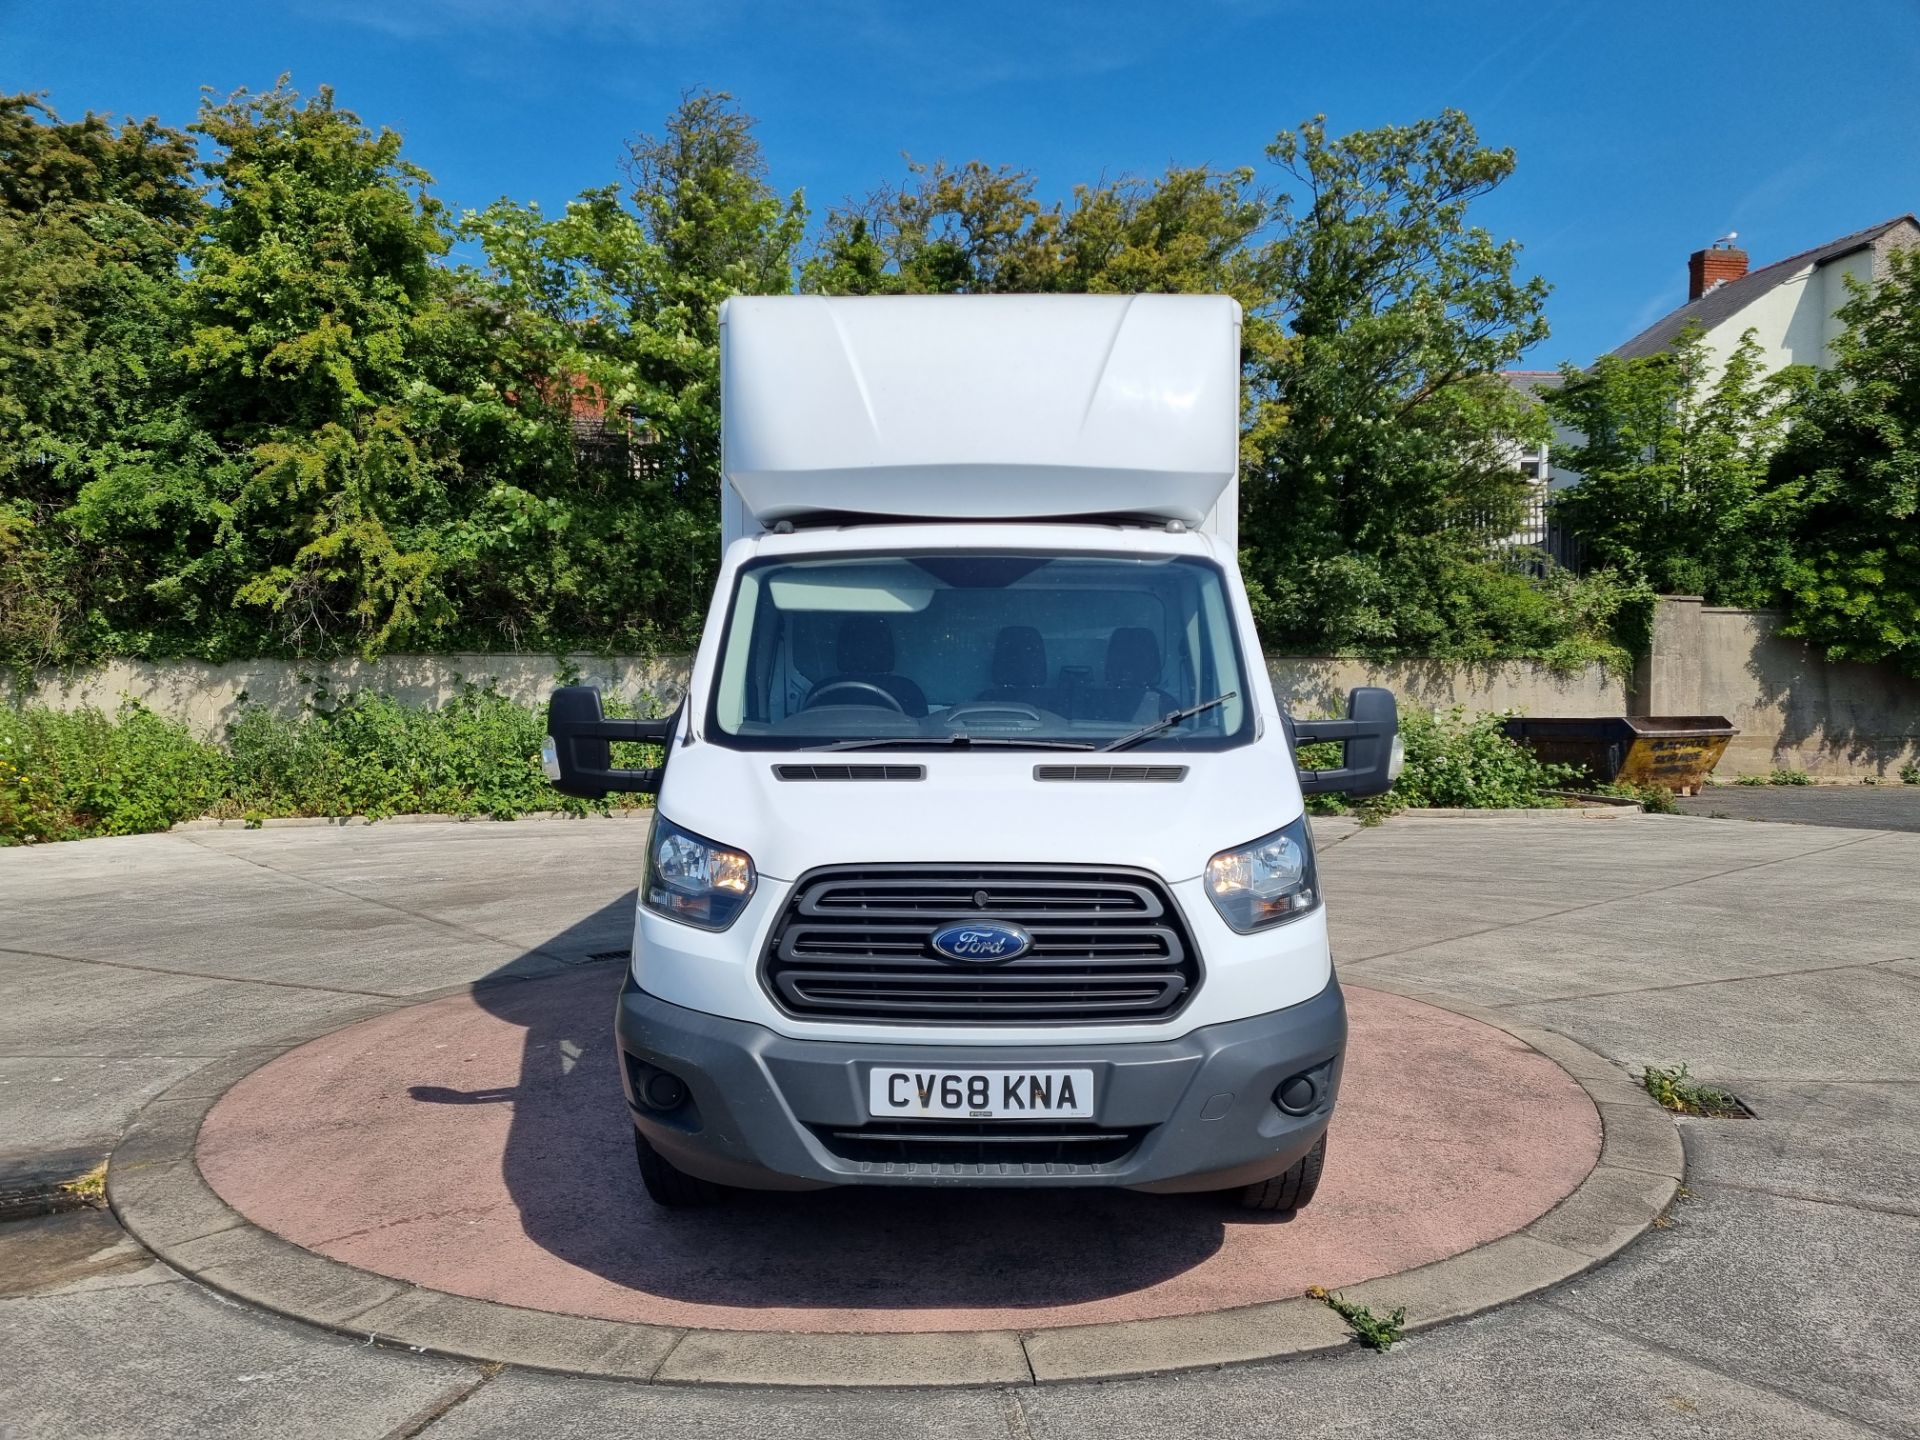 2018 Transit Luton with tail lift - Image 8 of 14